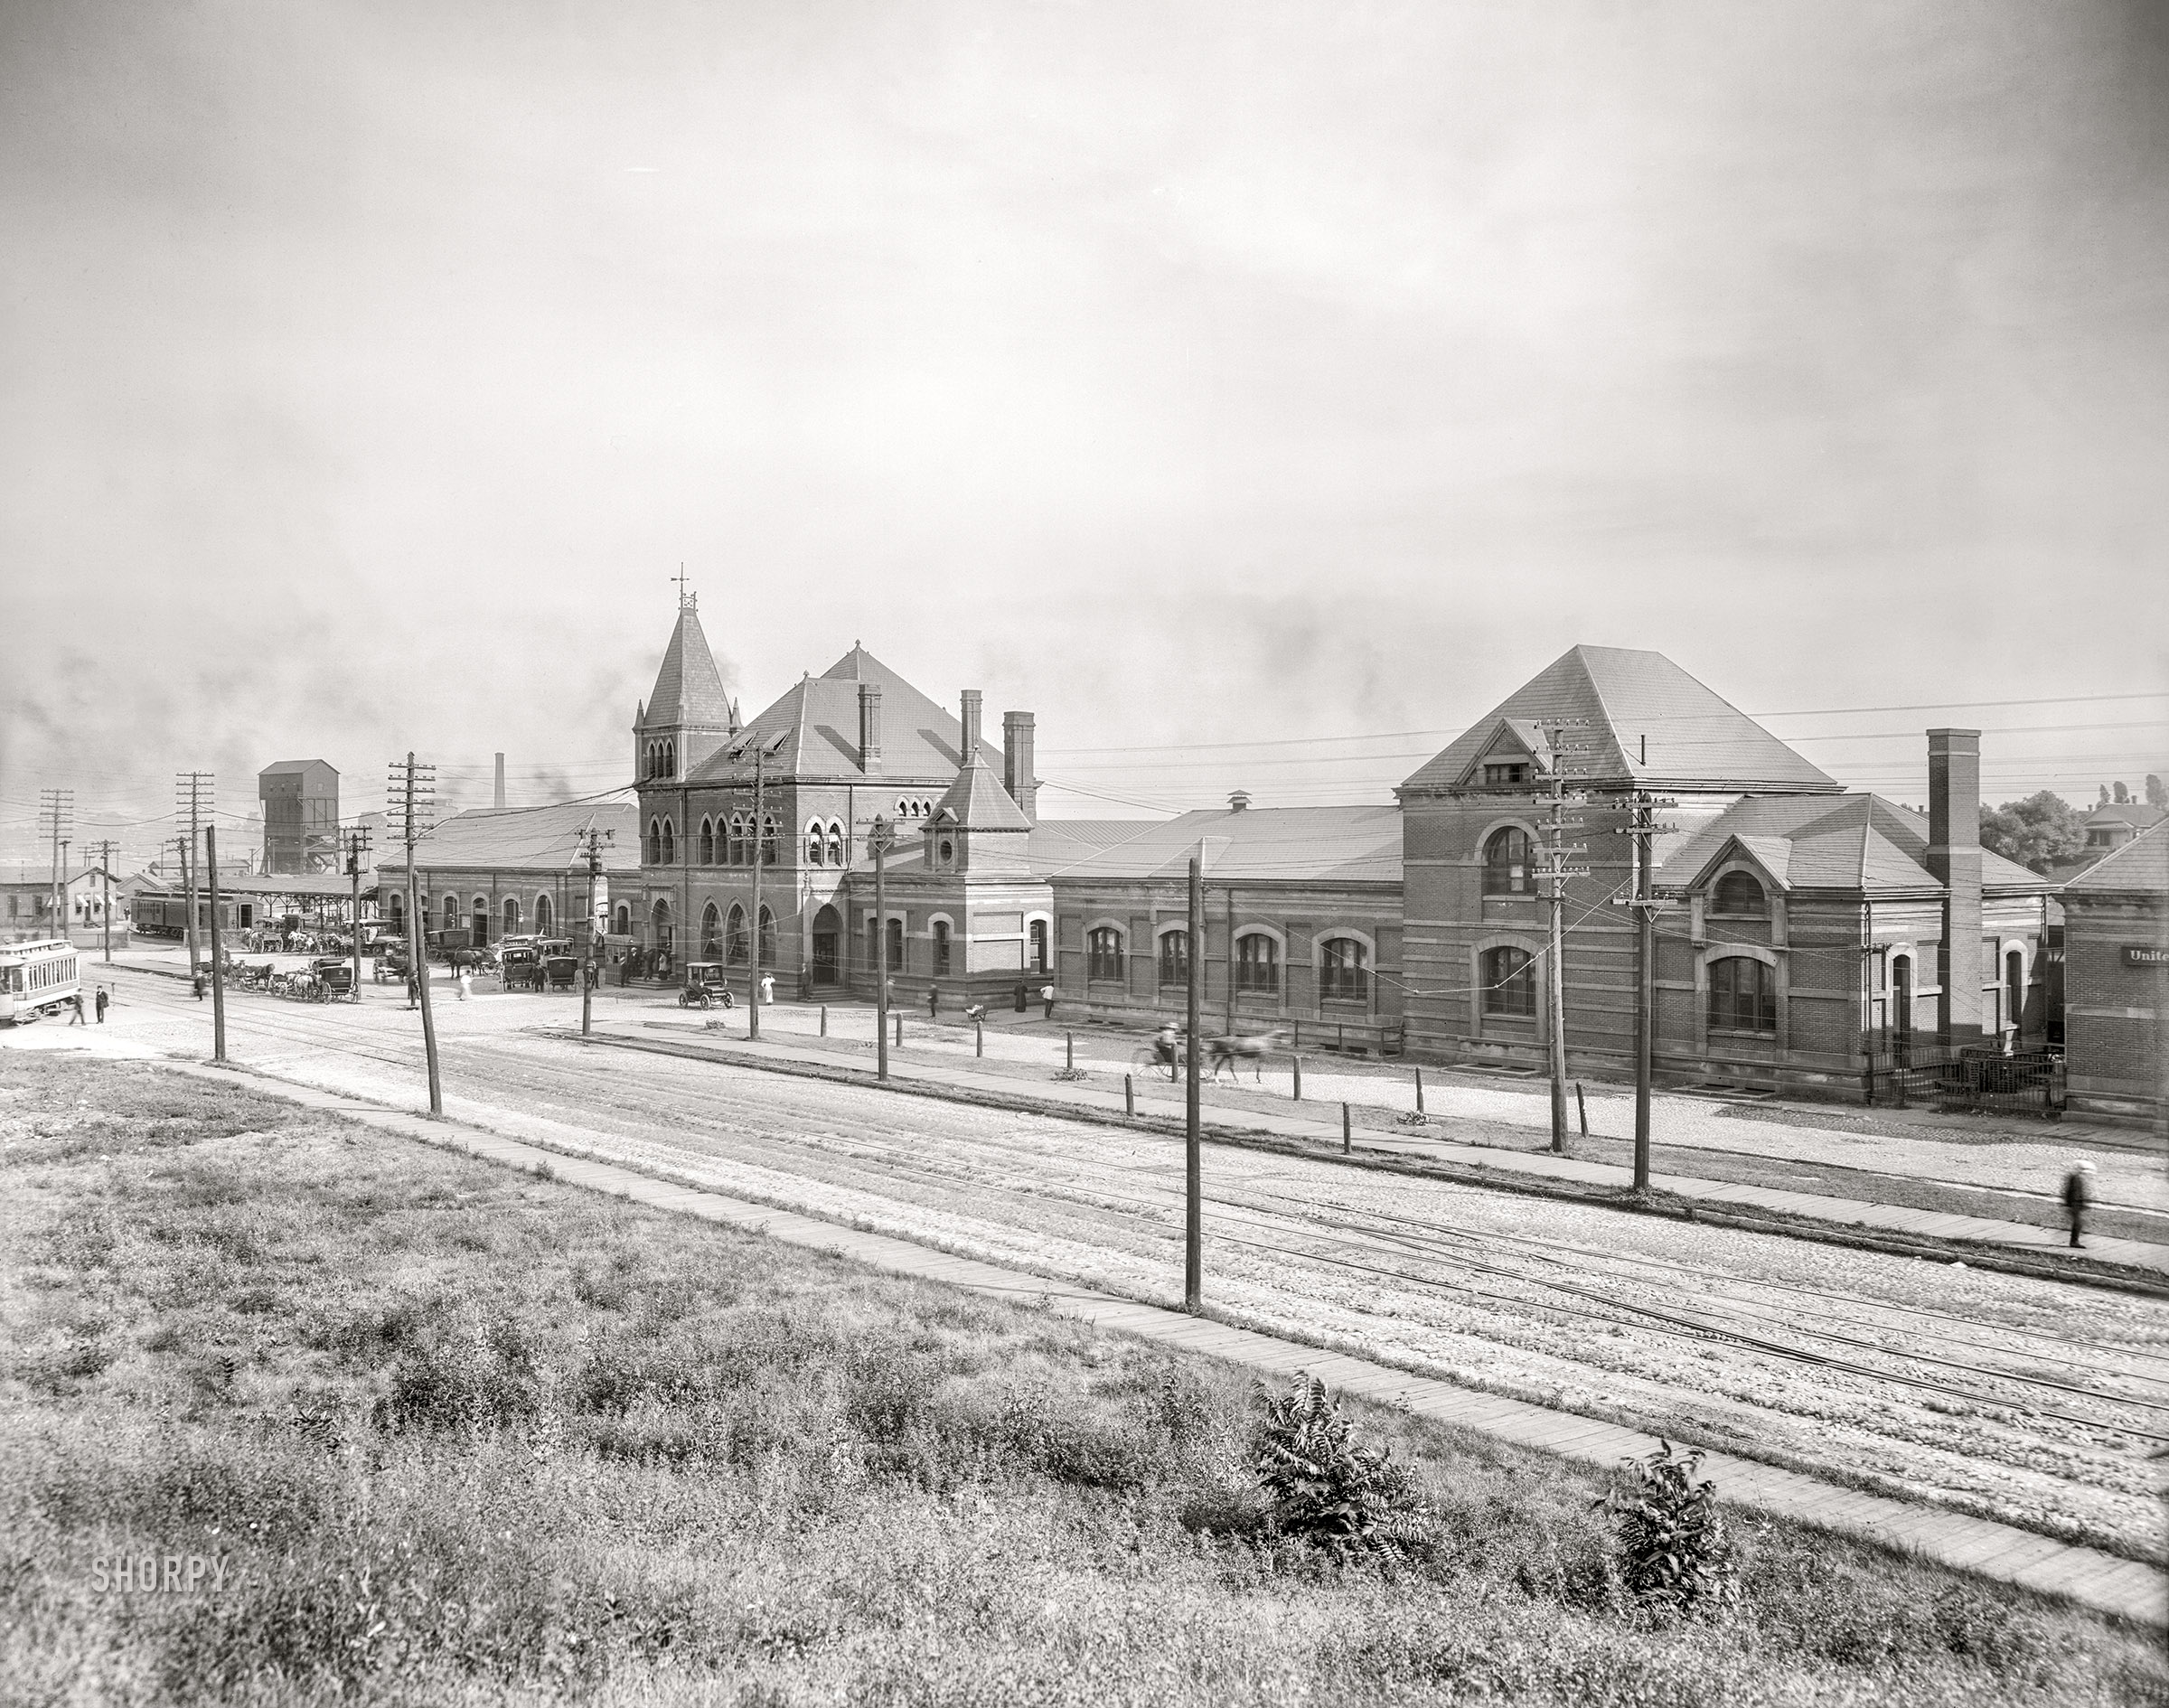 Circa 1905. "Union Station, Toledo, Ohio." Completed in 1886; replaced by the Central Union Terminal of 1950. 8x10 inch dry plate glass negative, Detroit Photographic Co. View full size.